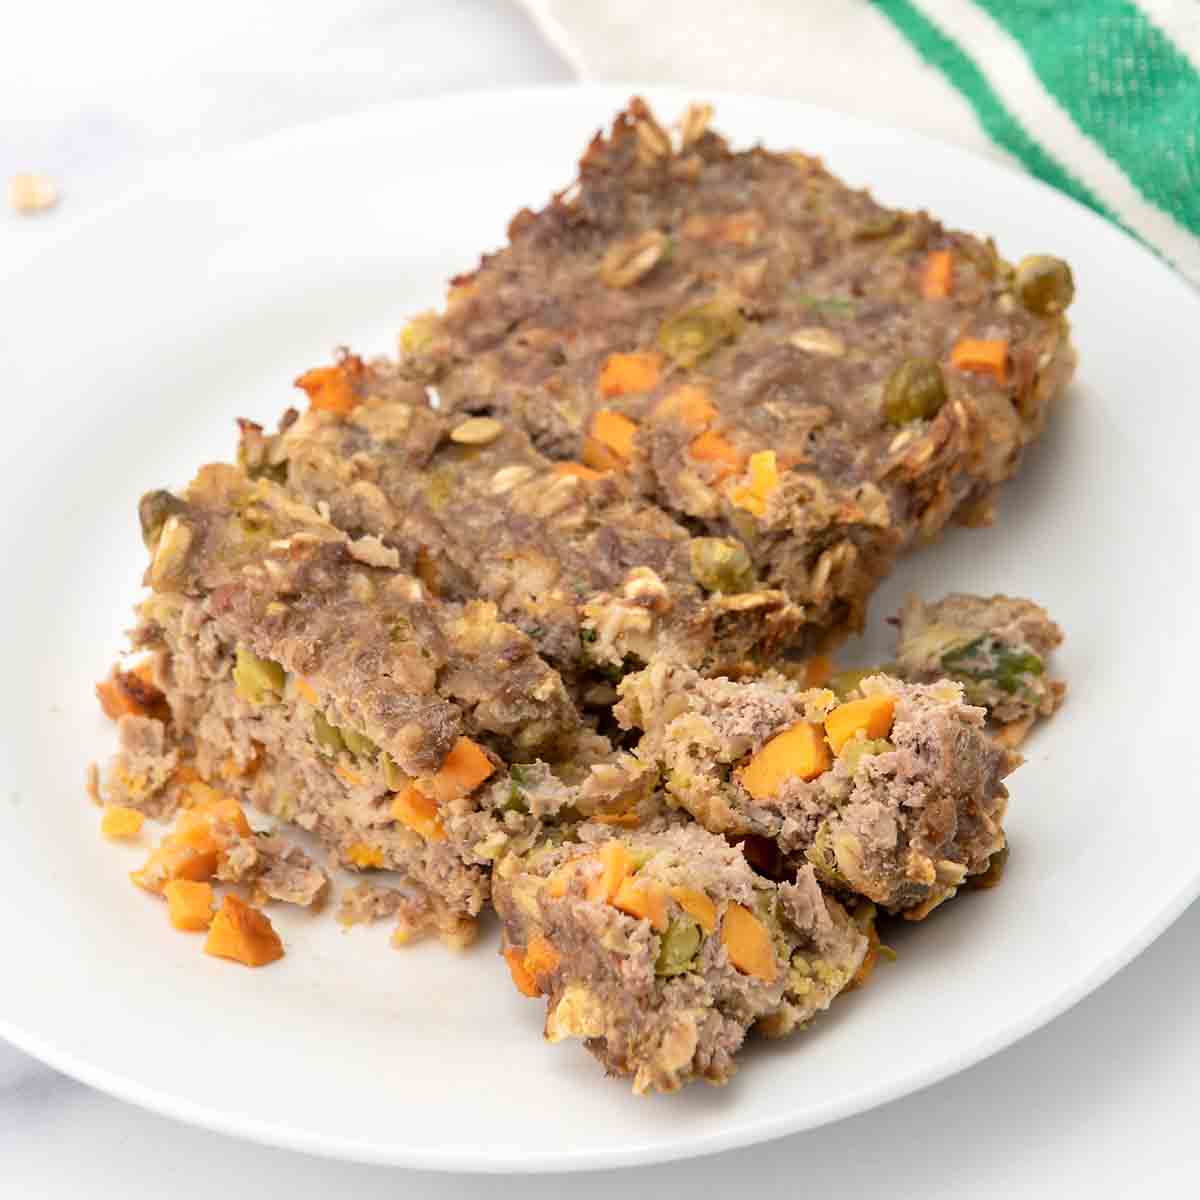 Homemade meatloaf for dogs on a plate.